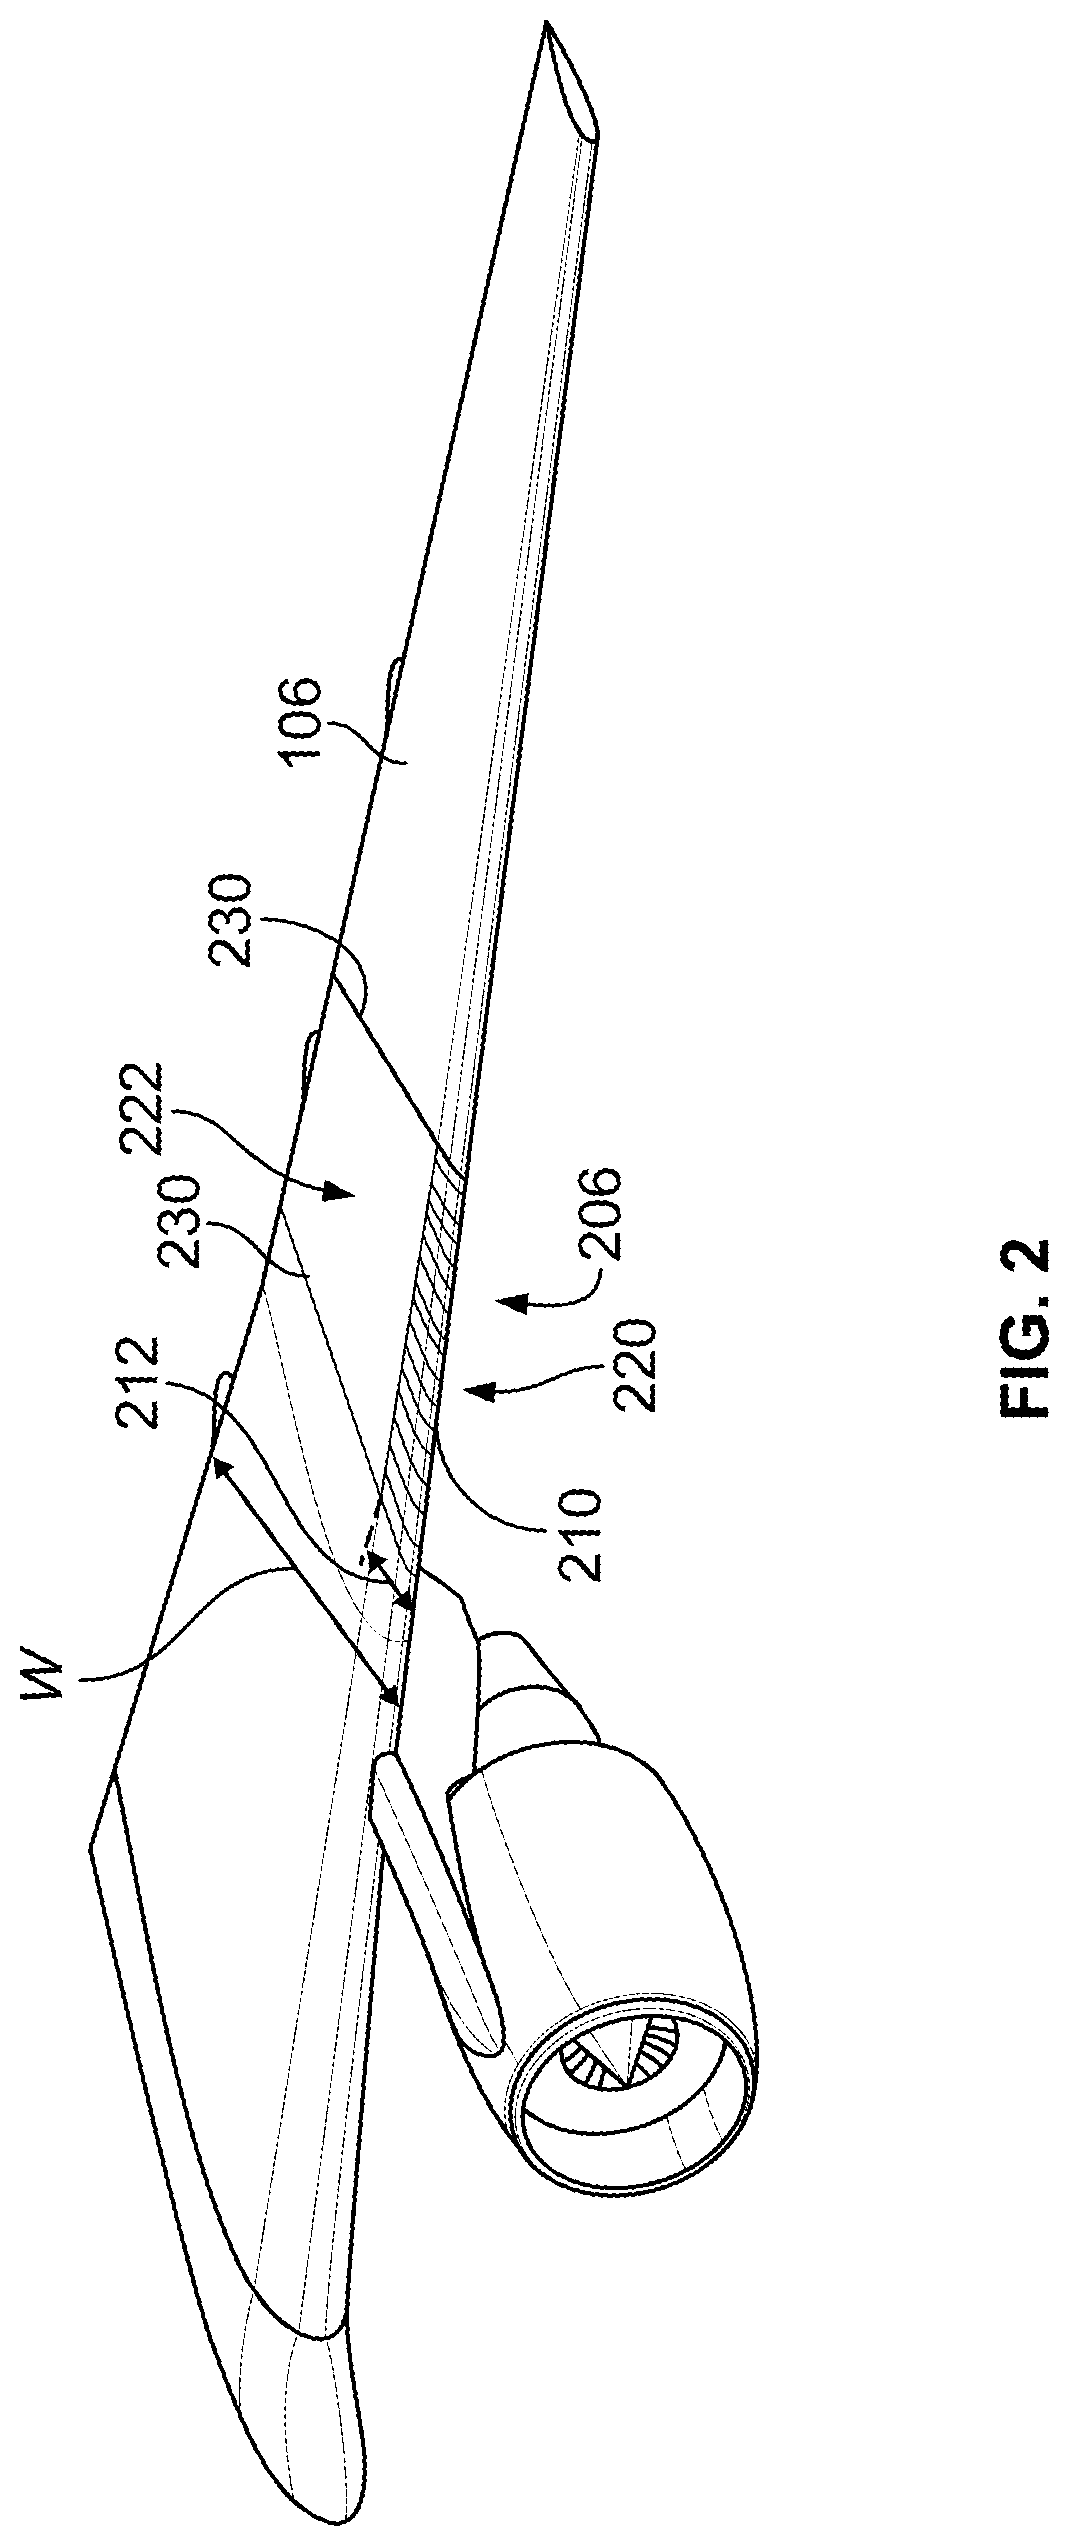 Systems and methods for aircraft structure surface covers